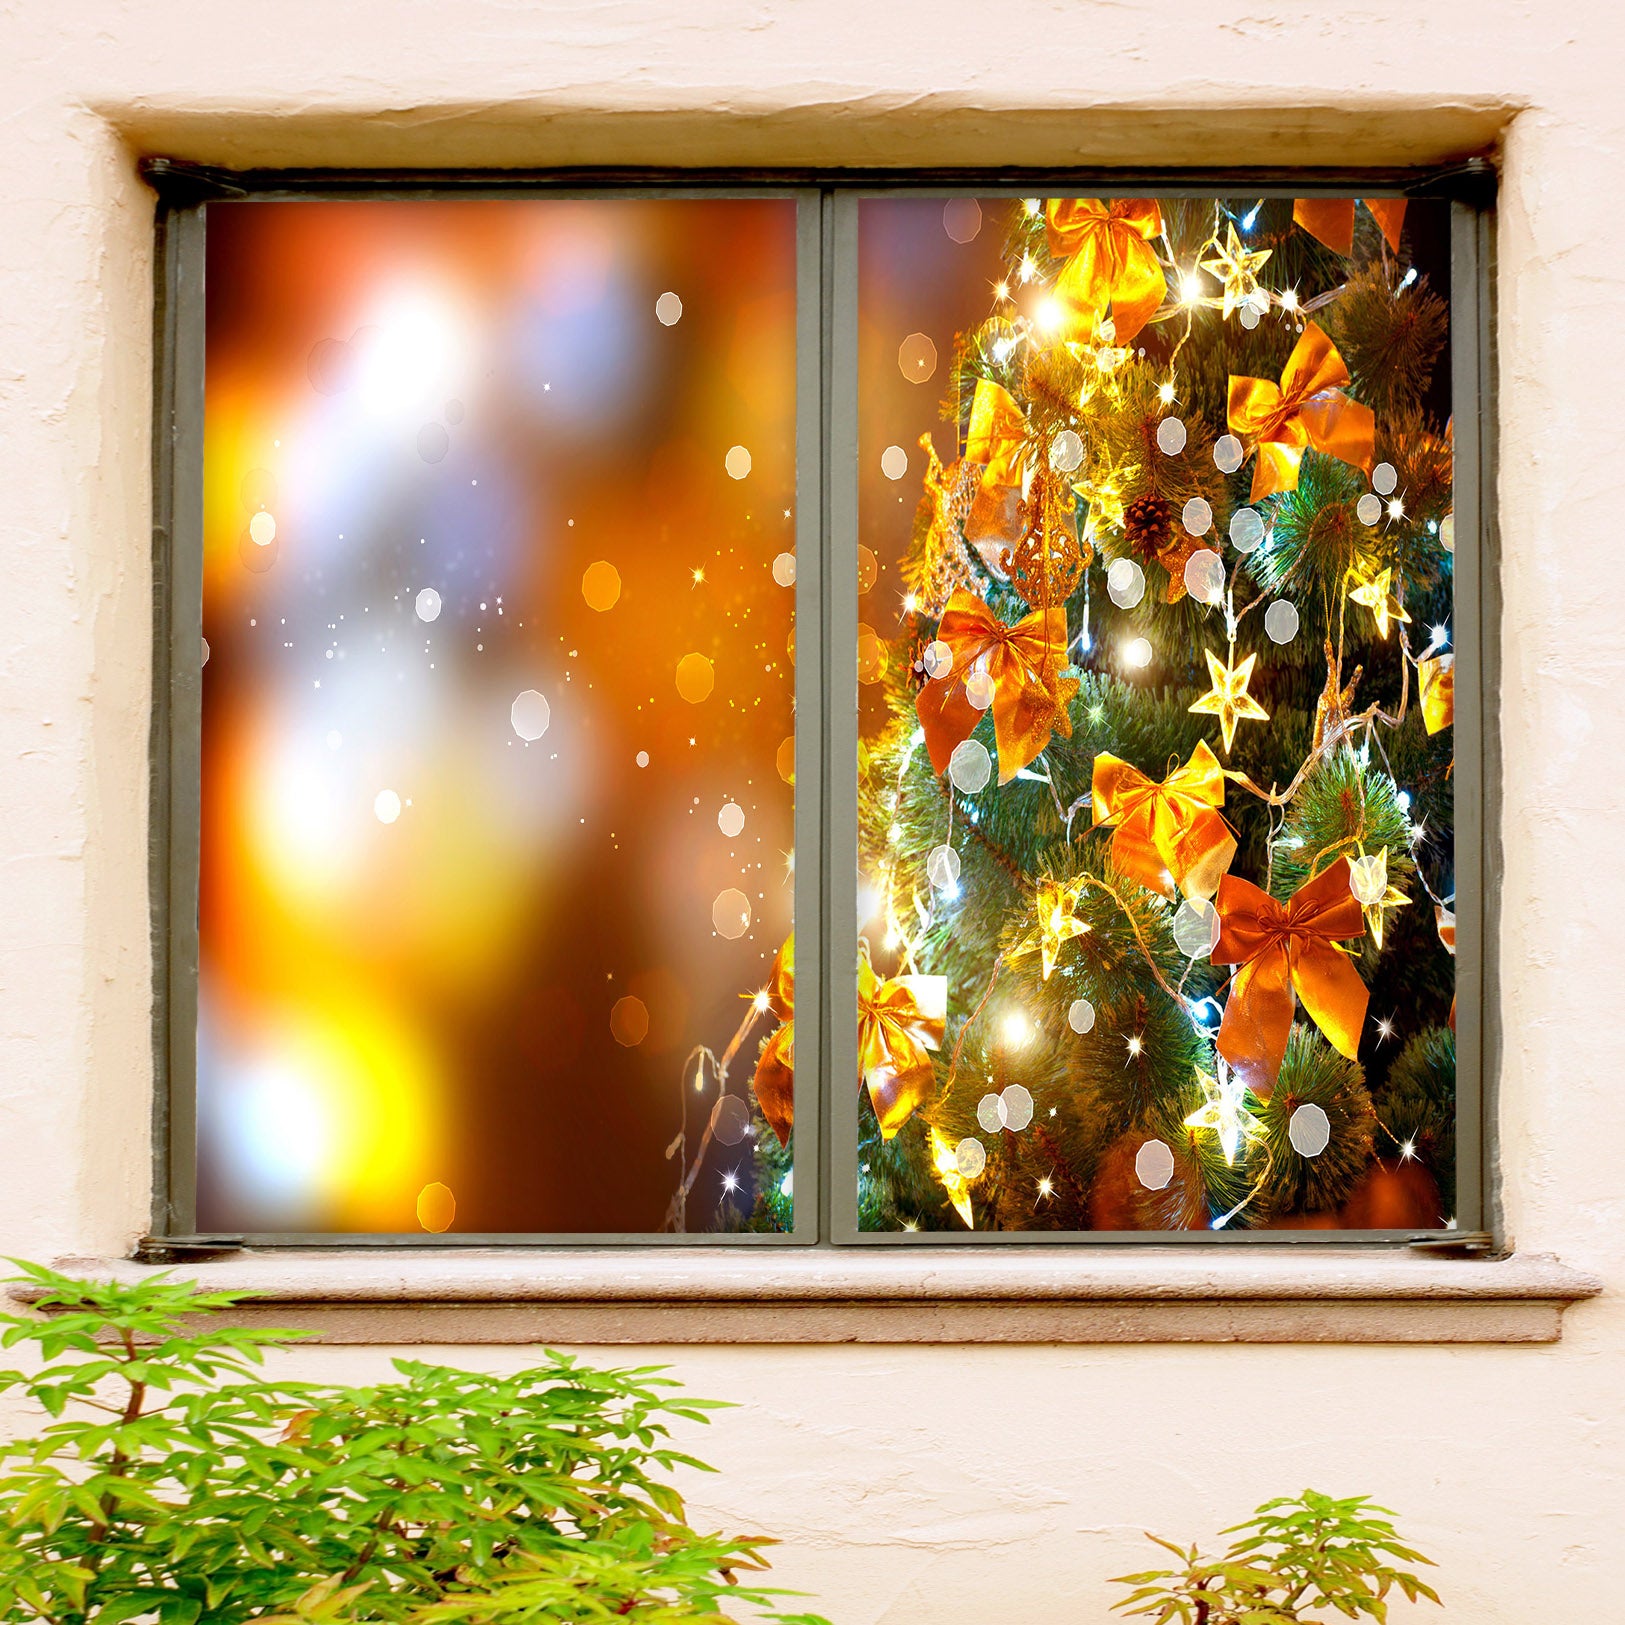 3D Golden Bow 42173 Christmas Window Film Print Sticker Cling Stained Glass Xmas